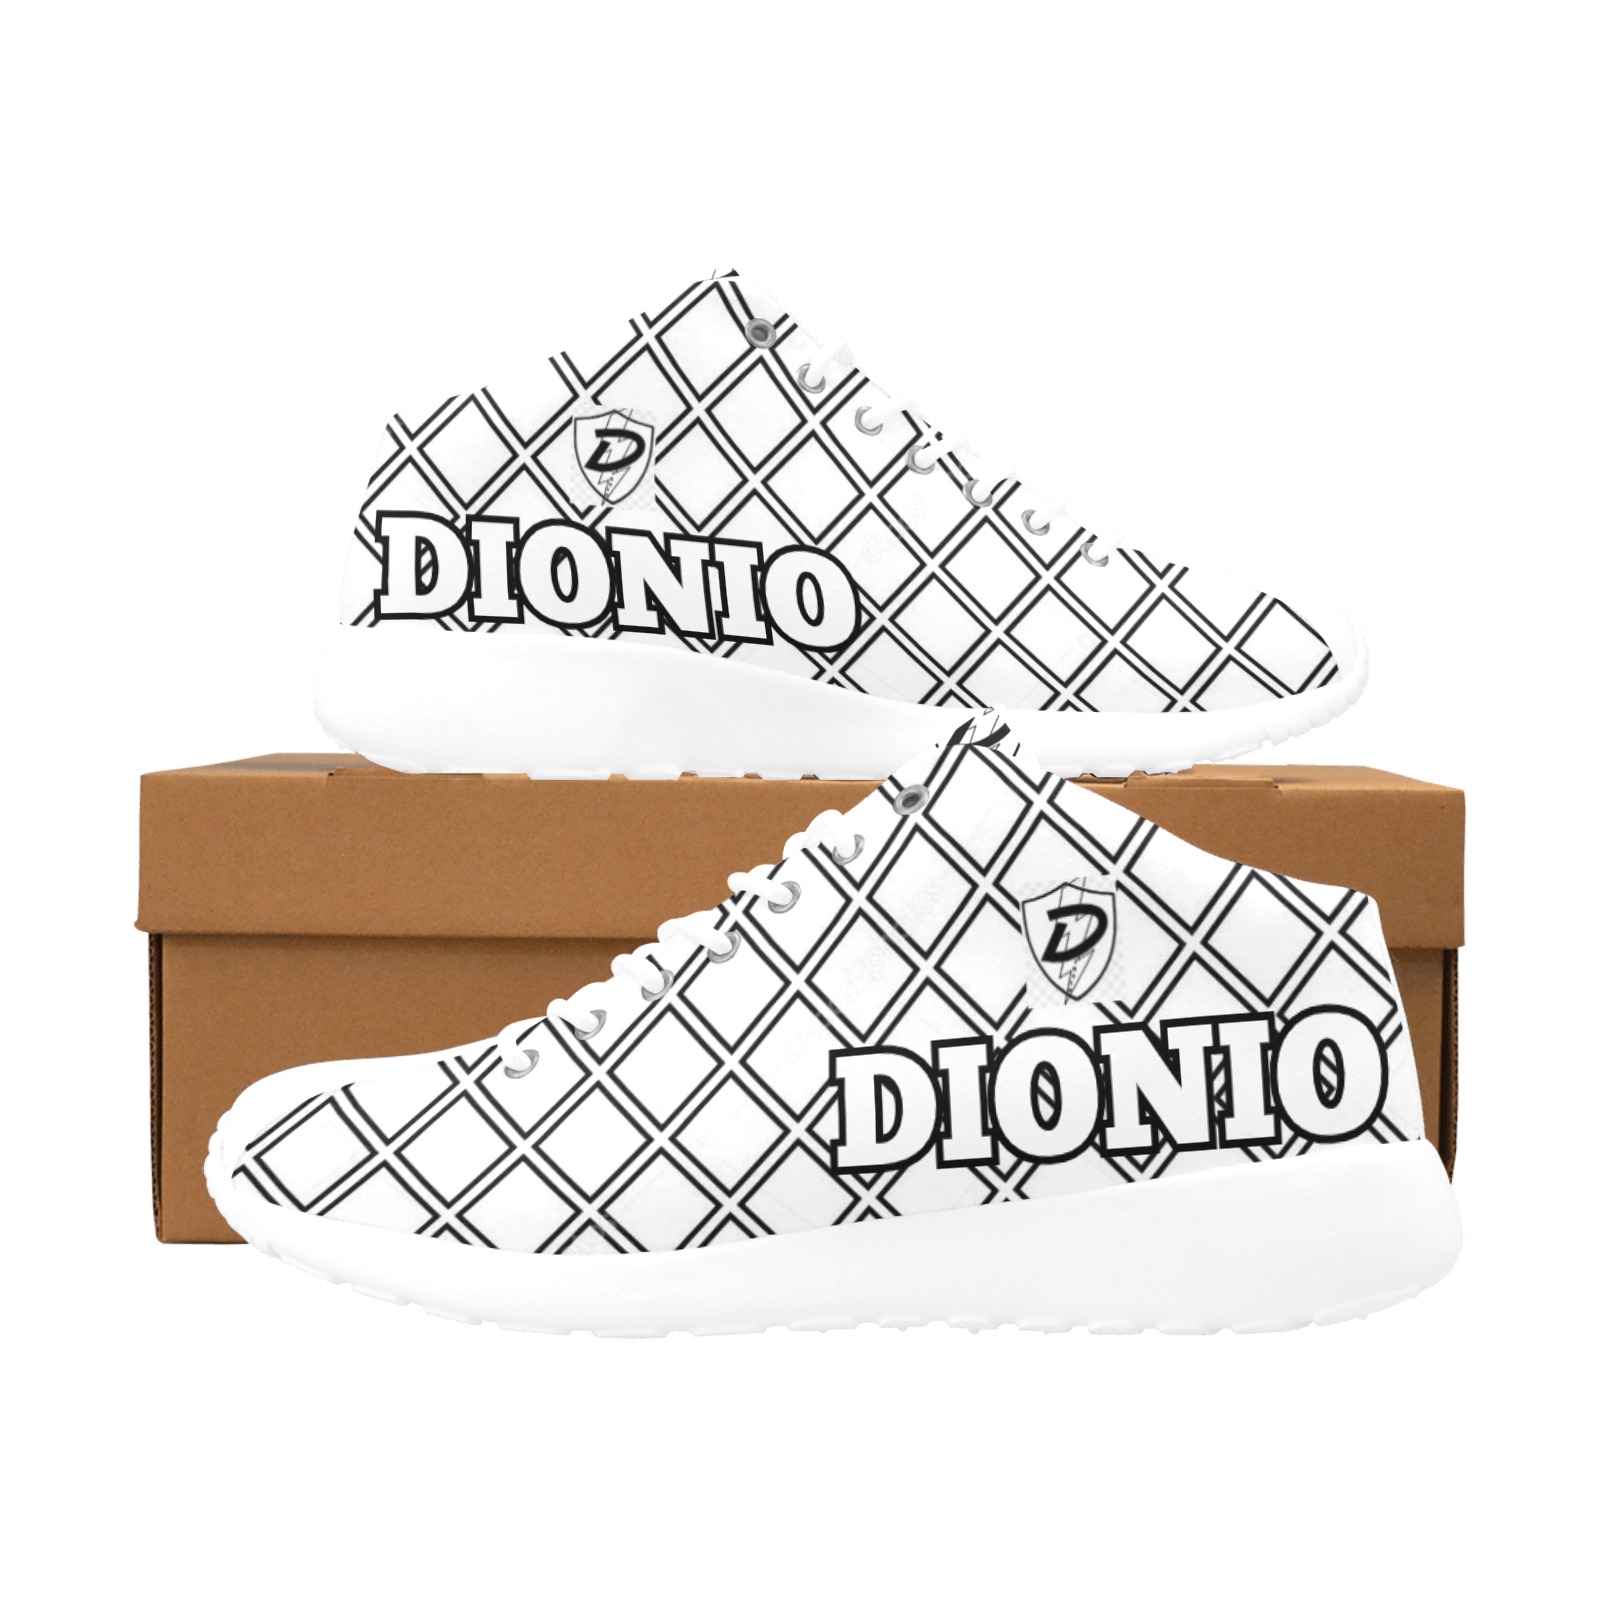 DIONIO - Cage Basketball Sneakers (White) Men's Basketball Training Shoes (Model 47502)